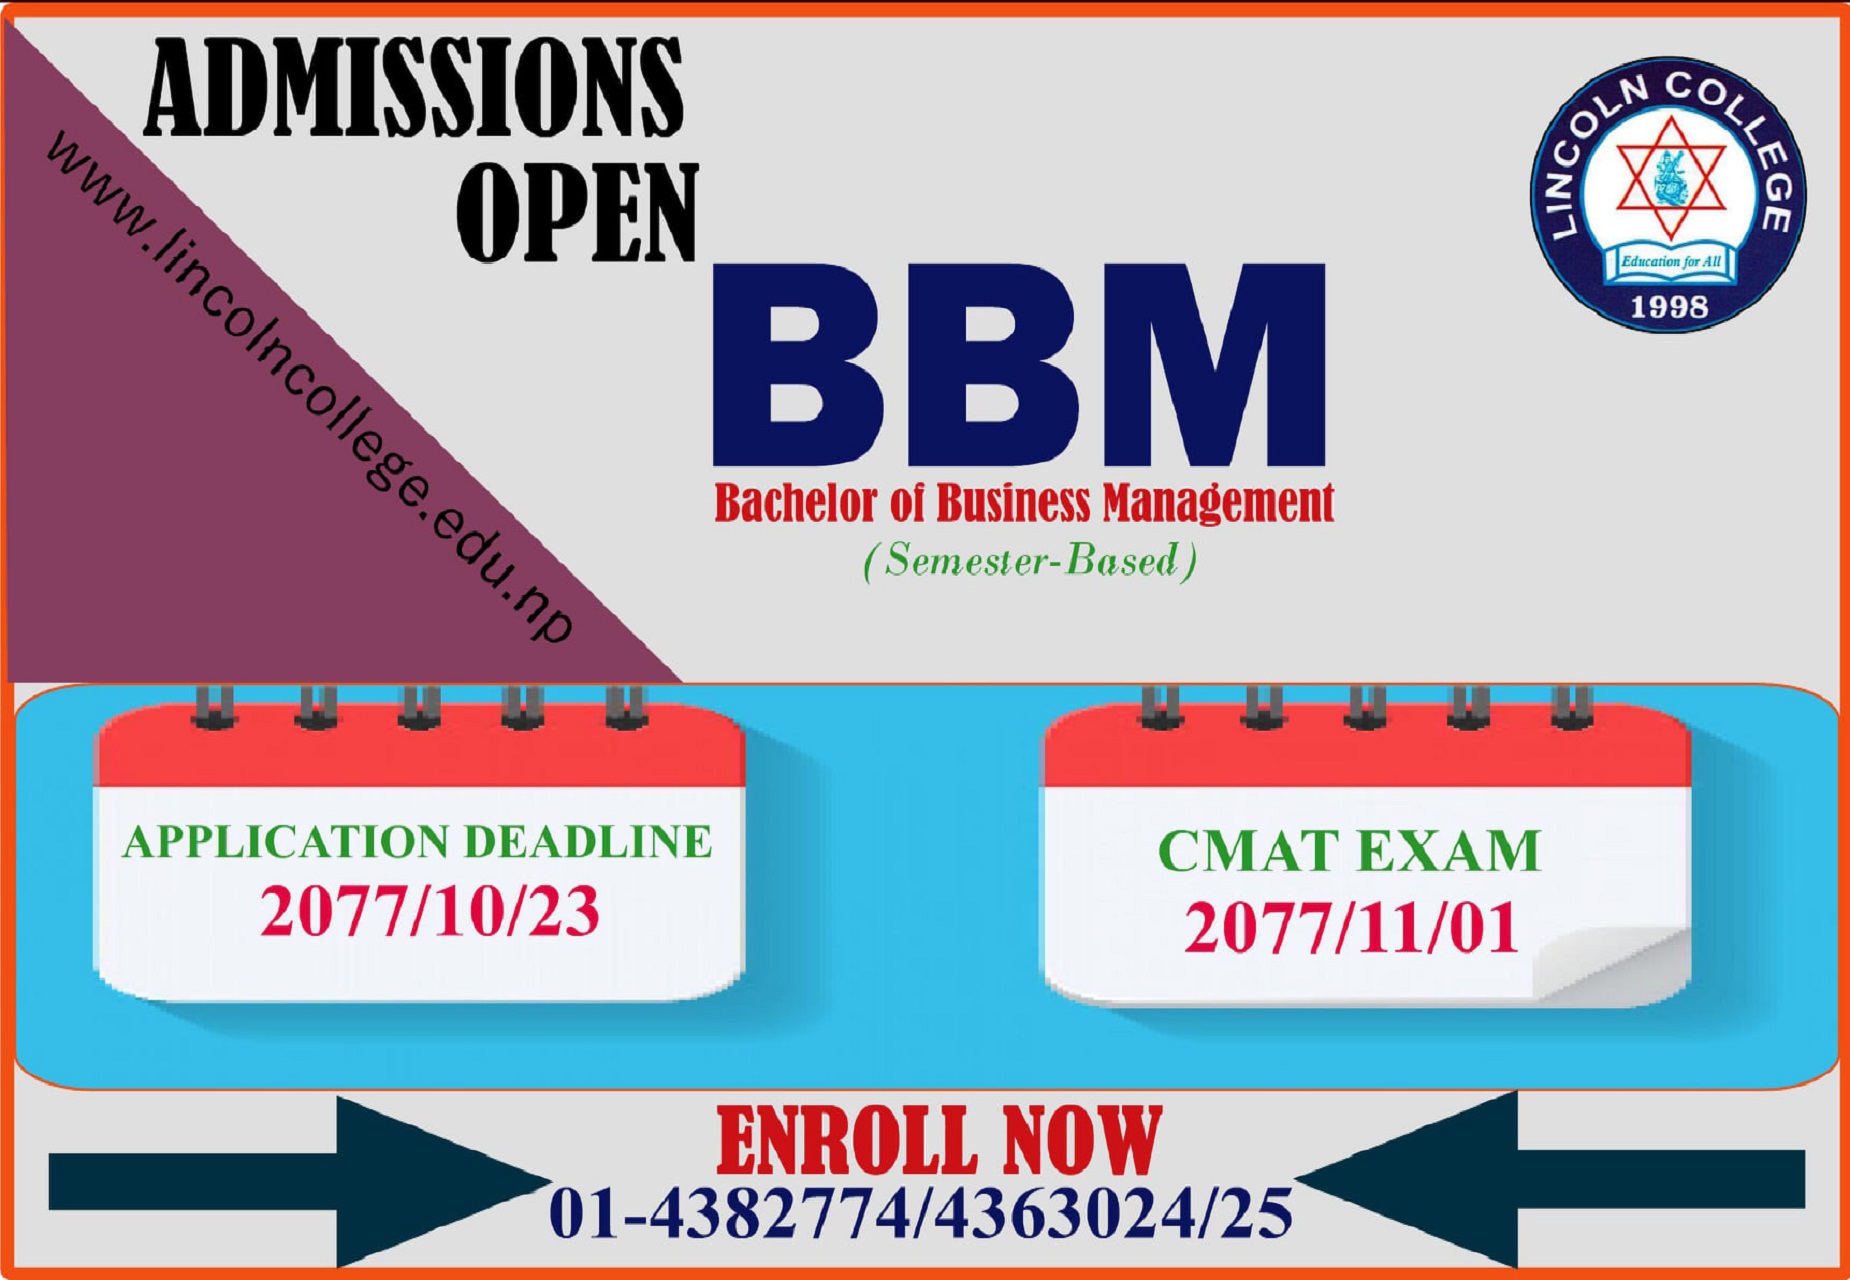 Admission open for BBM